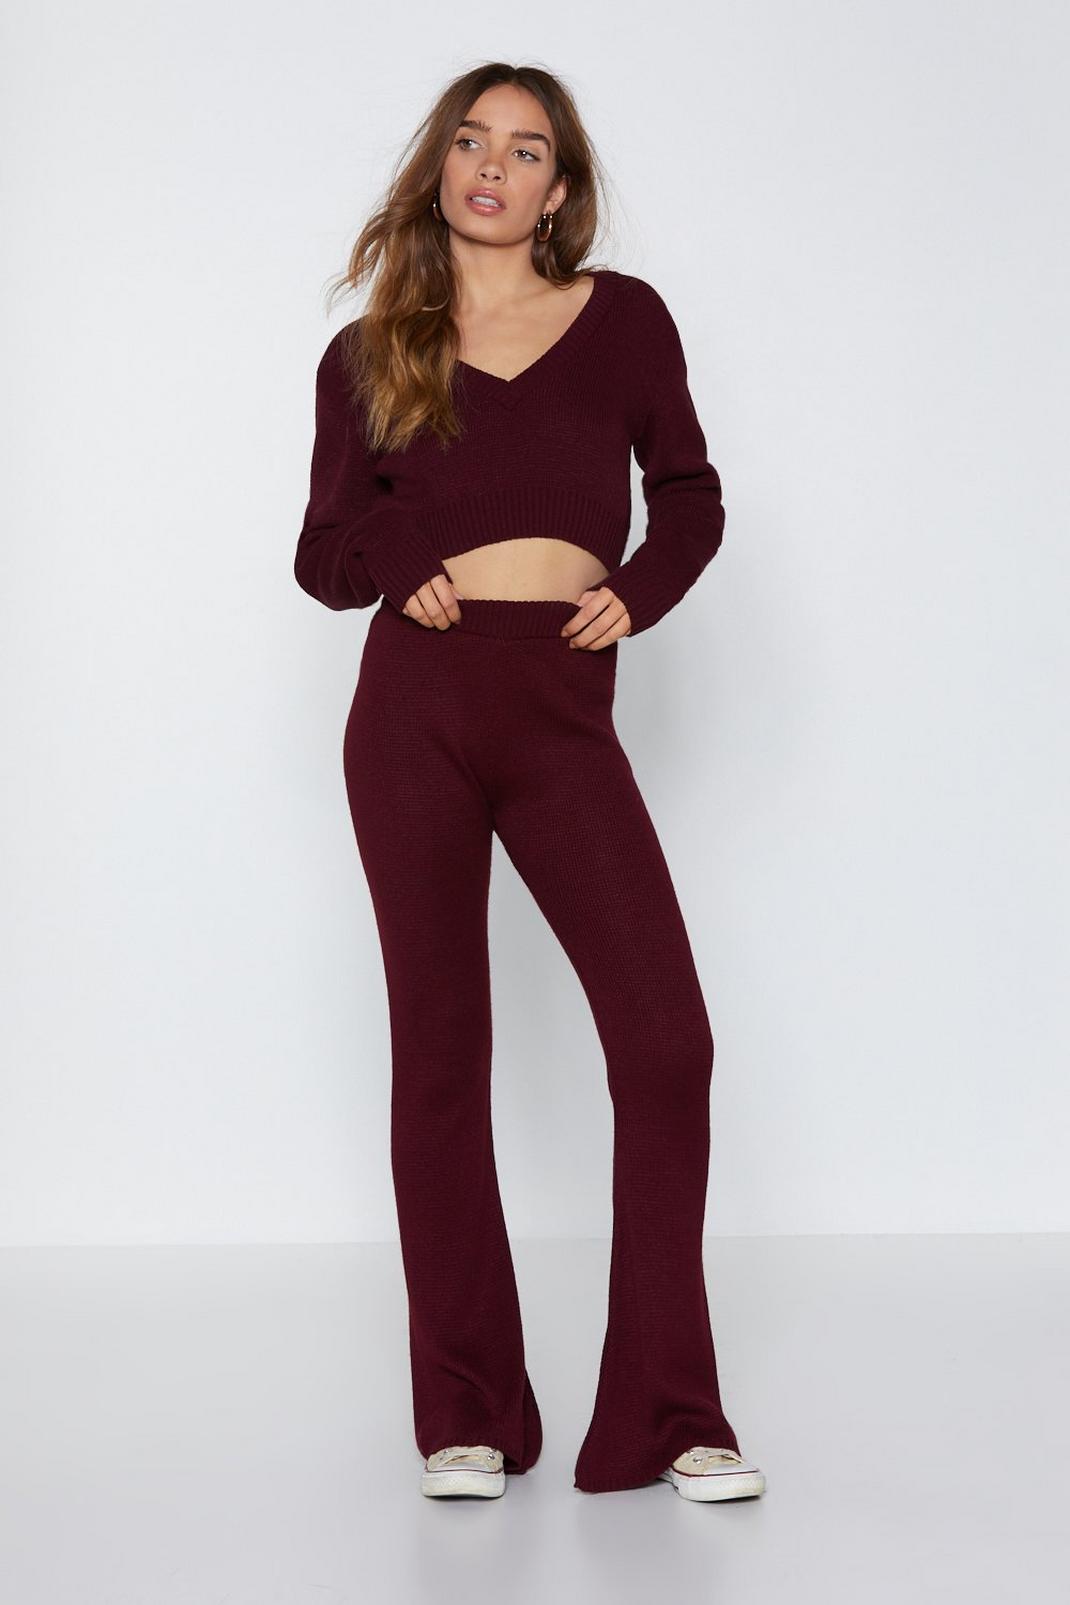 Are You into Knit Flare Pants